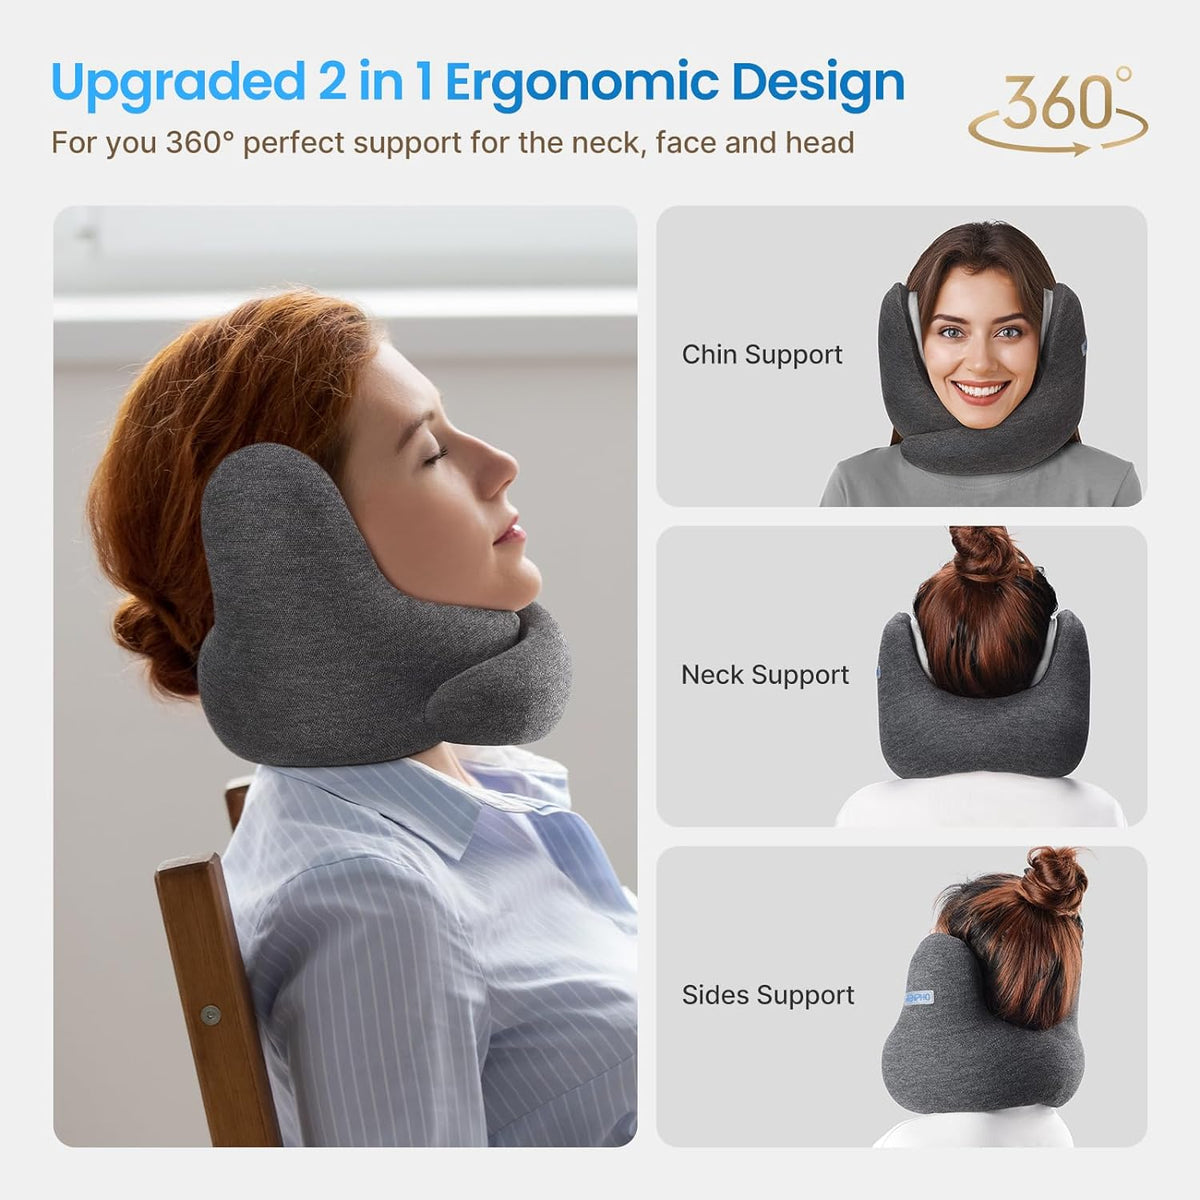 Advertisement showcasing a RENPHO Neck Pillow with images demonstrating its various uses: neck, chin, and side support for sleeping upright, and a woman happily using it. The Renpho EU